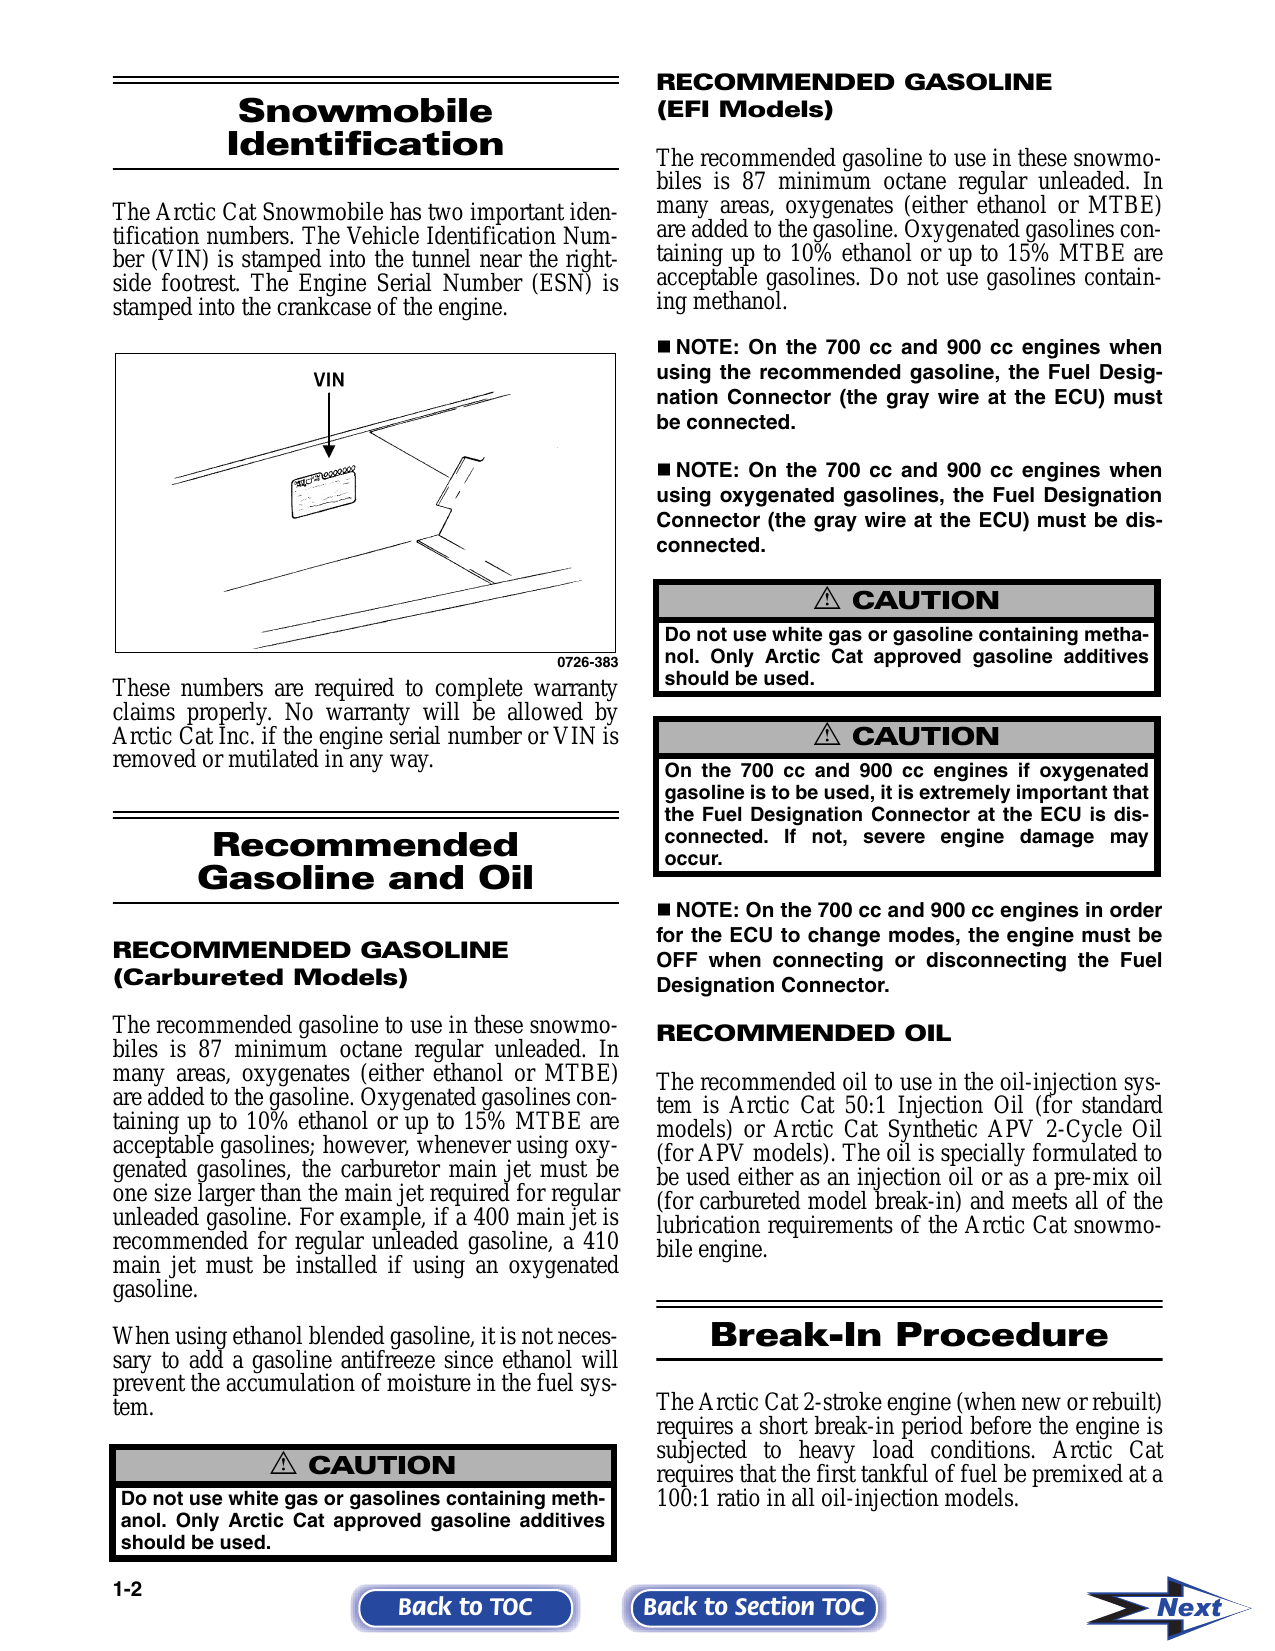 2006 Arctic Cat Snowmobile manual (for all models) Preview image 4